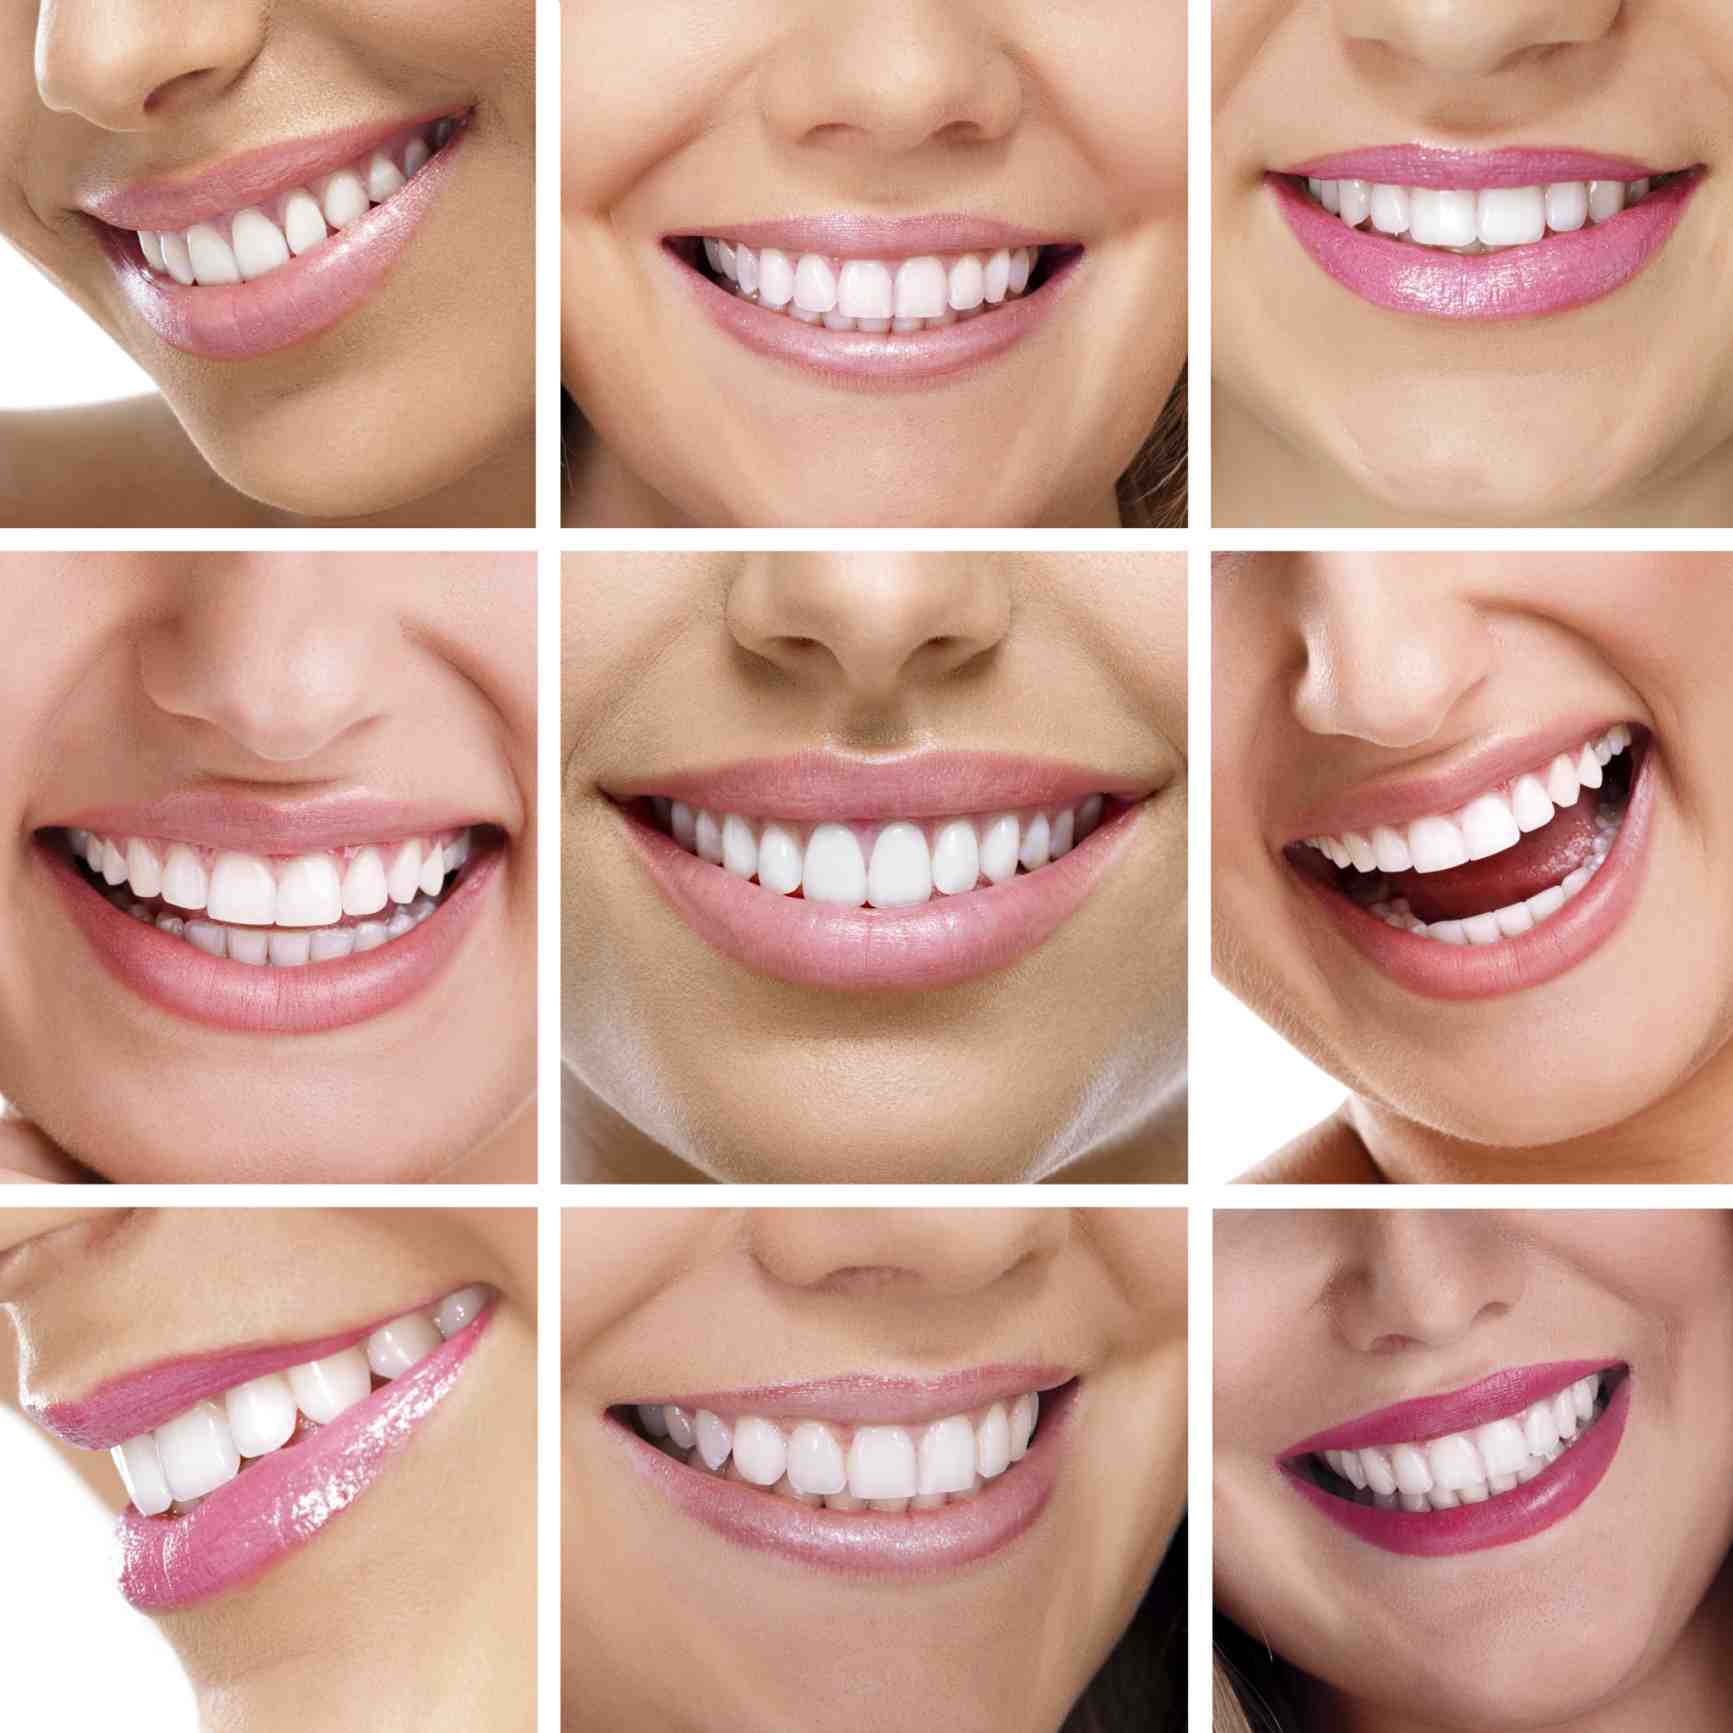 How much do cosmetic dental veneers cost?